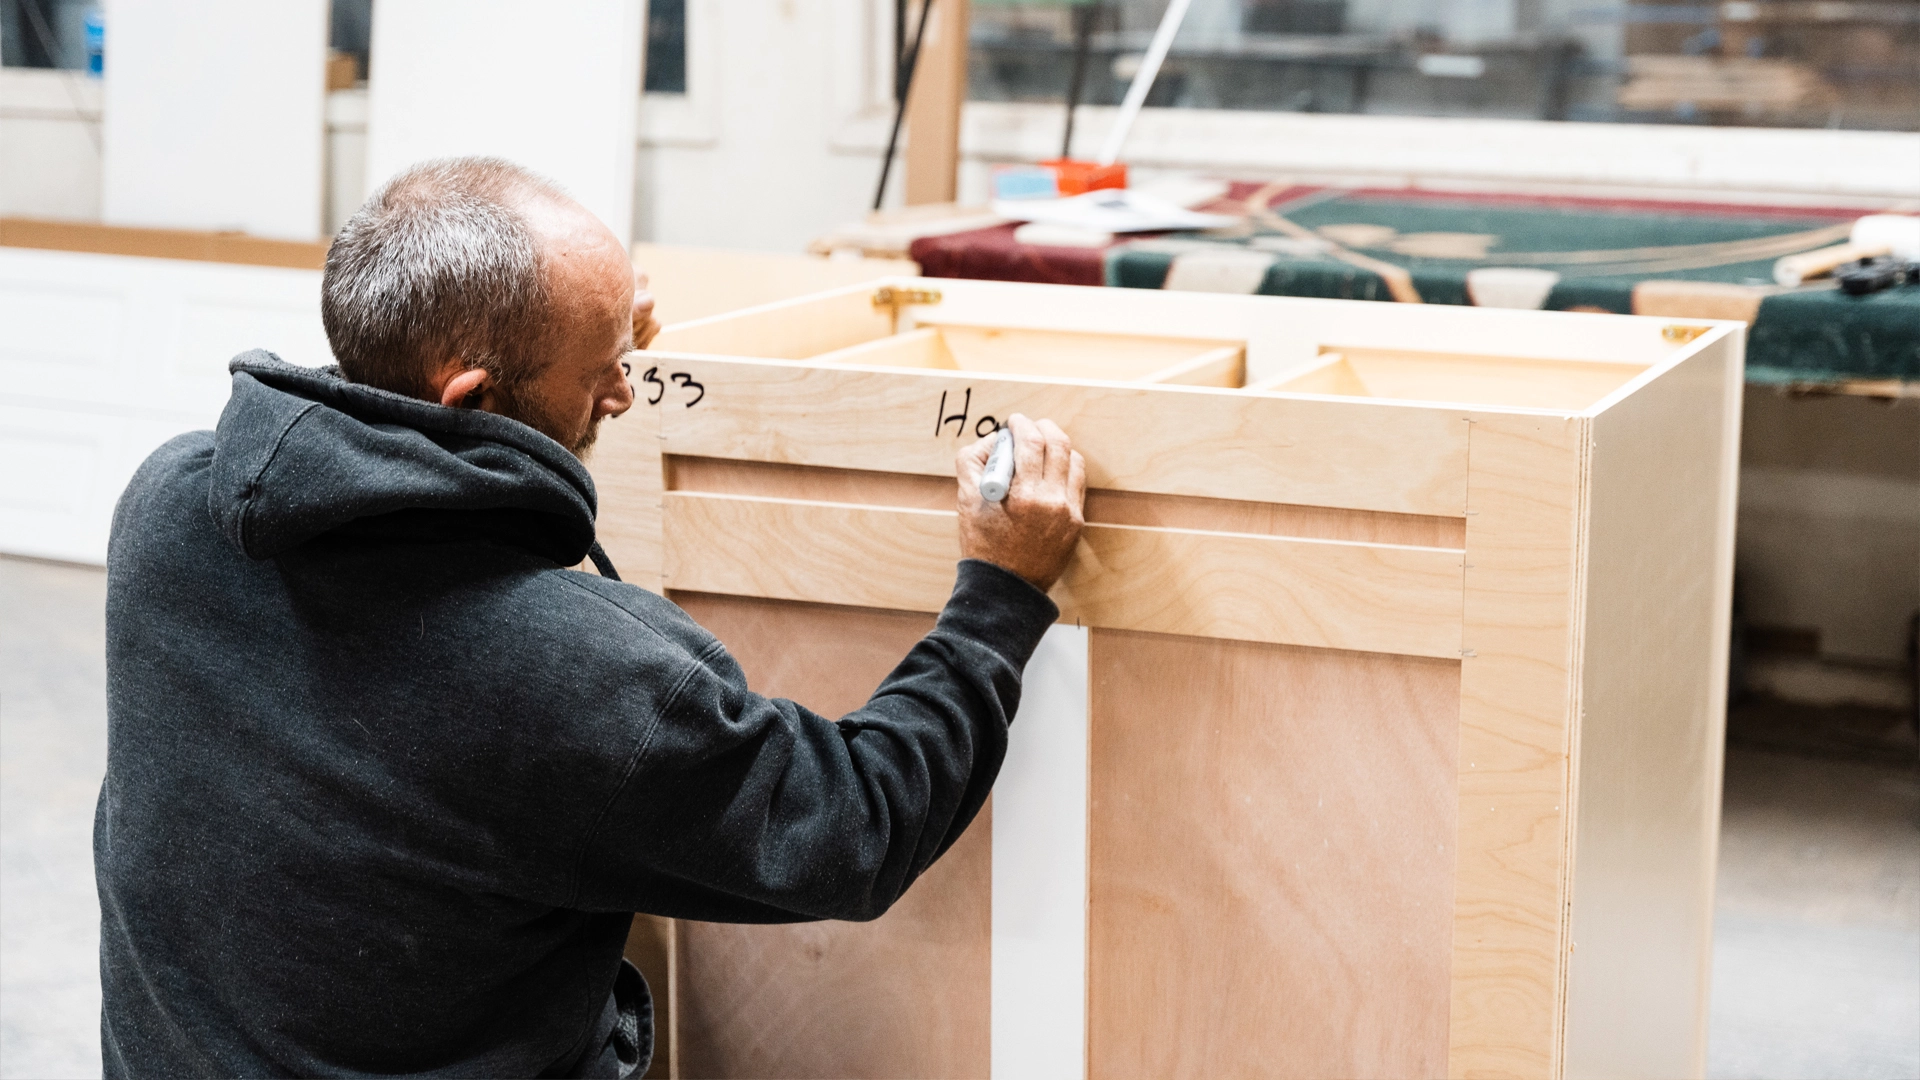 Cabinet builder writes notes on a set of partially constructed lower cabinets